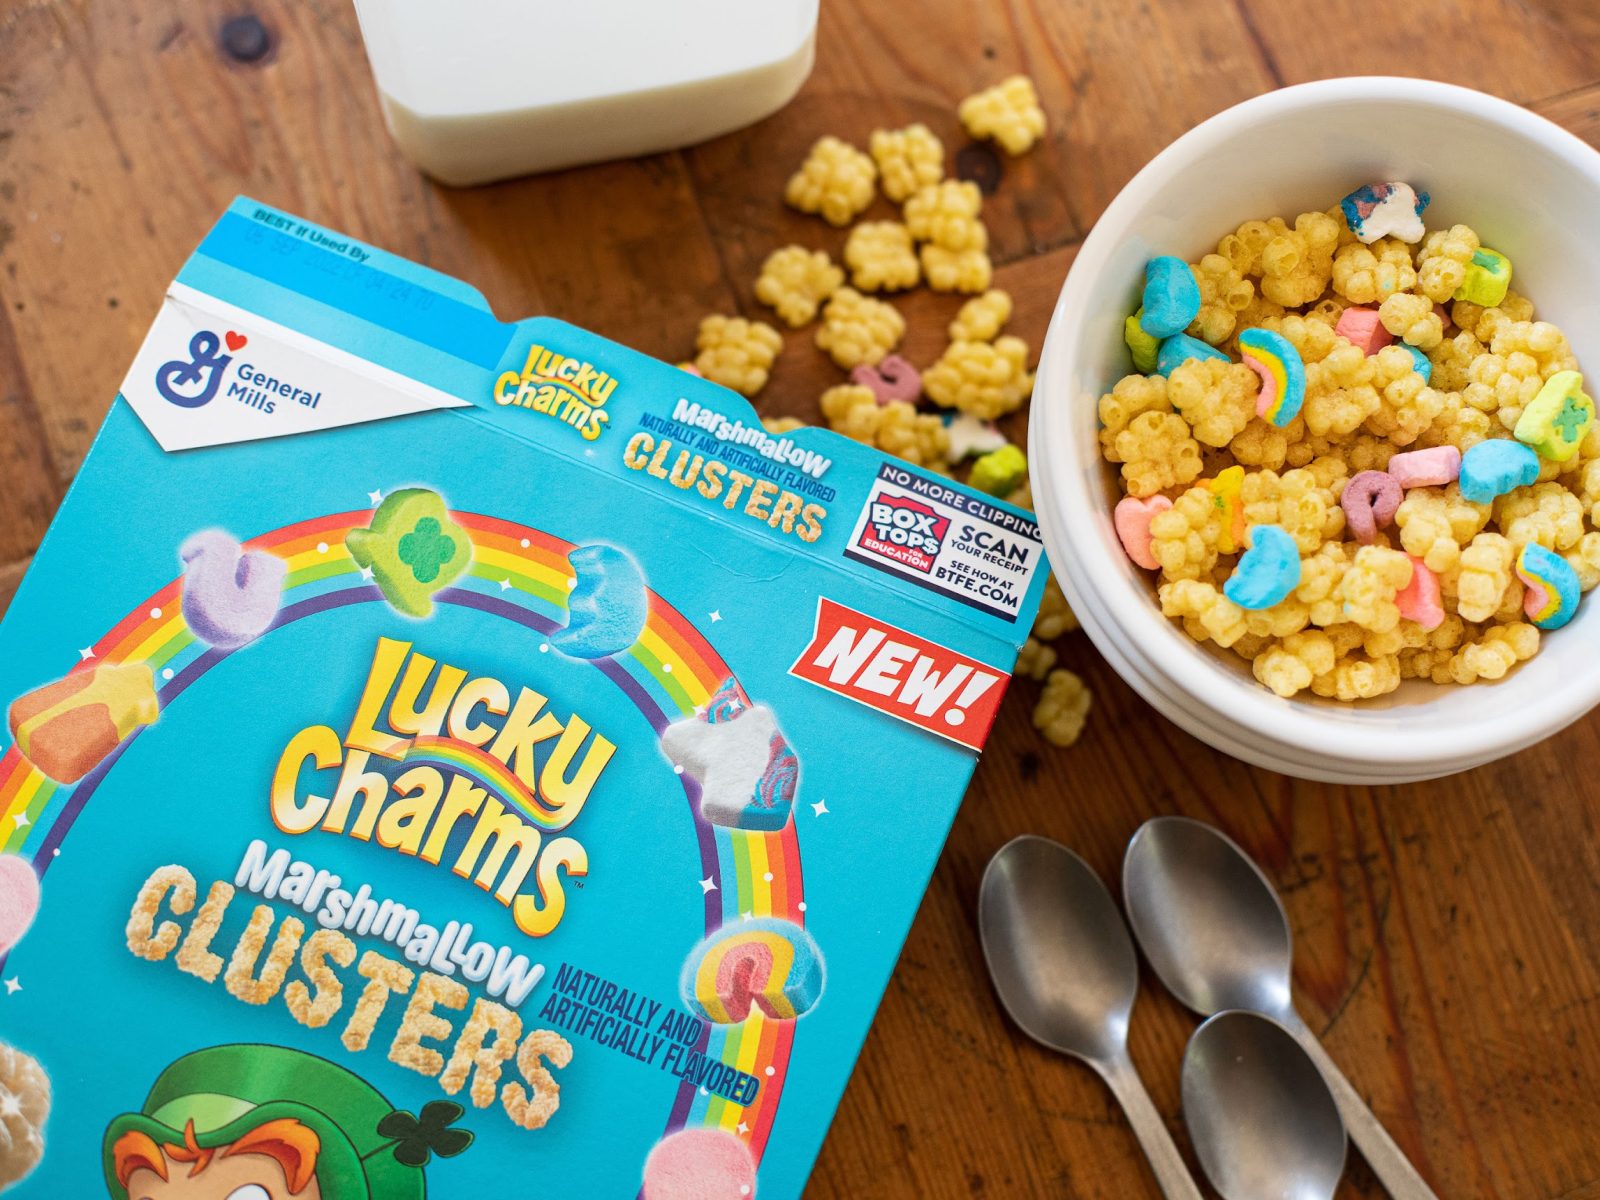 General Mills Cereal As Low As $1.19 Per Box This Week At Publix on I Heart Publix